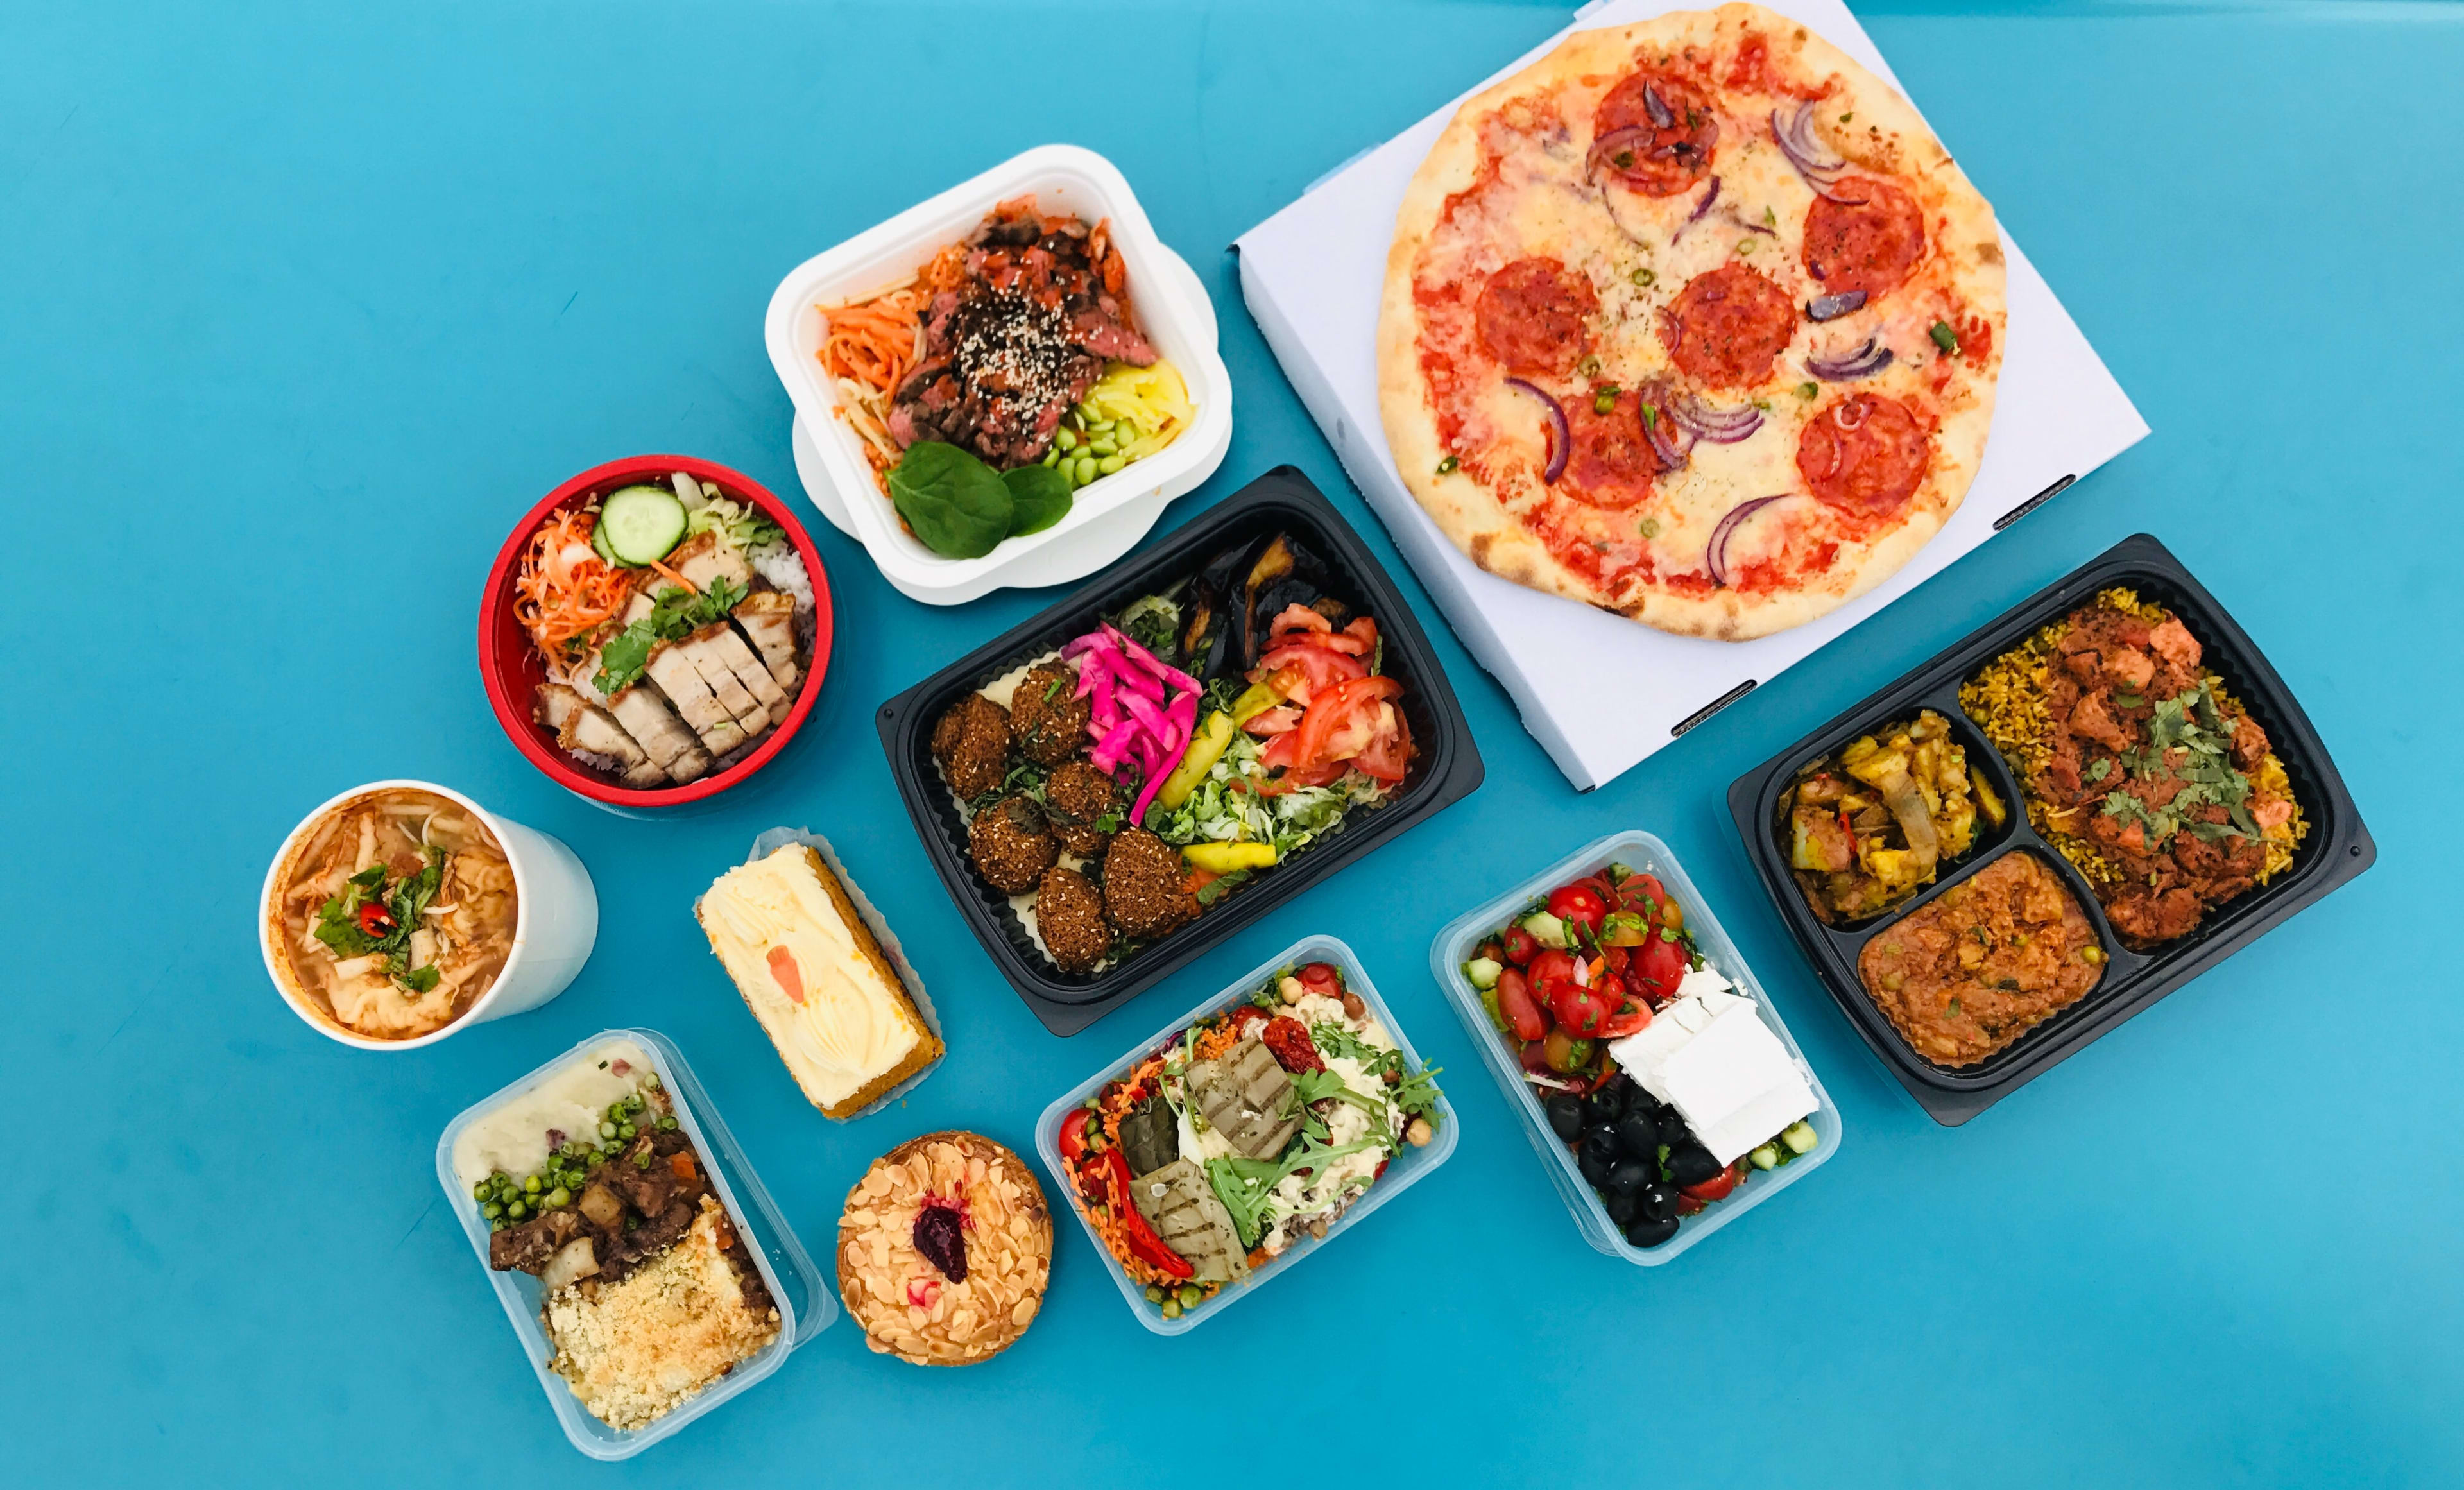 <h2> Over two-thirds of working Australians have to order takeaway food at some point during the week </h2>